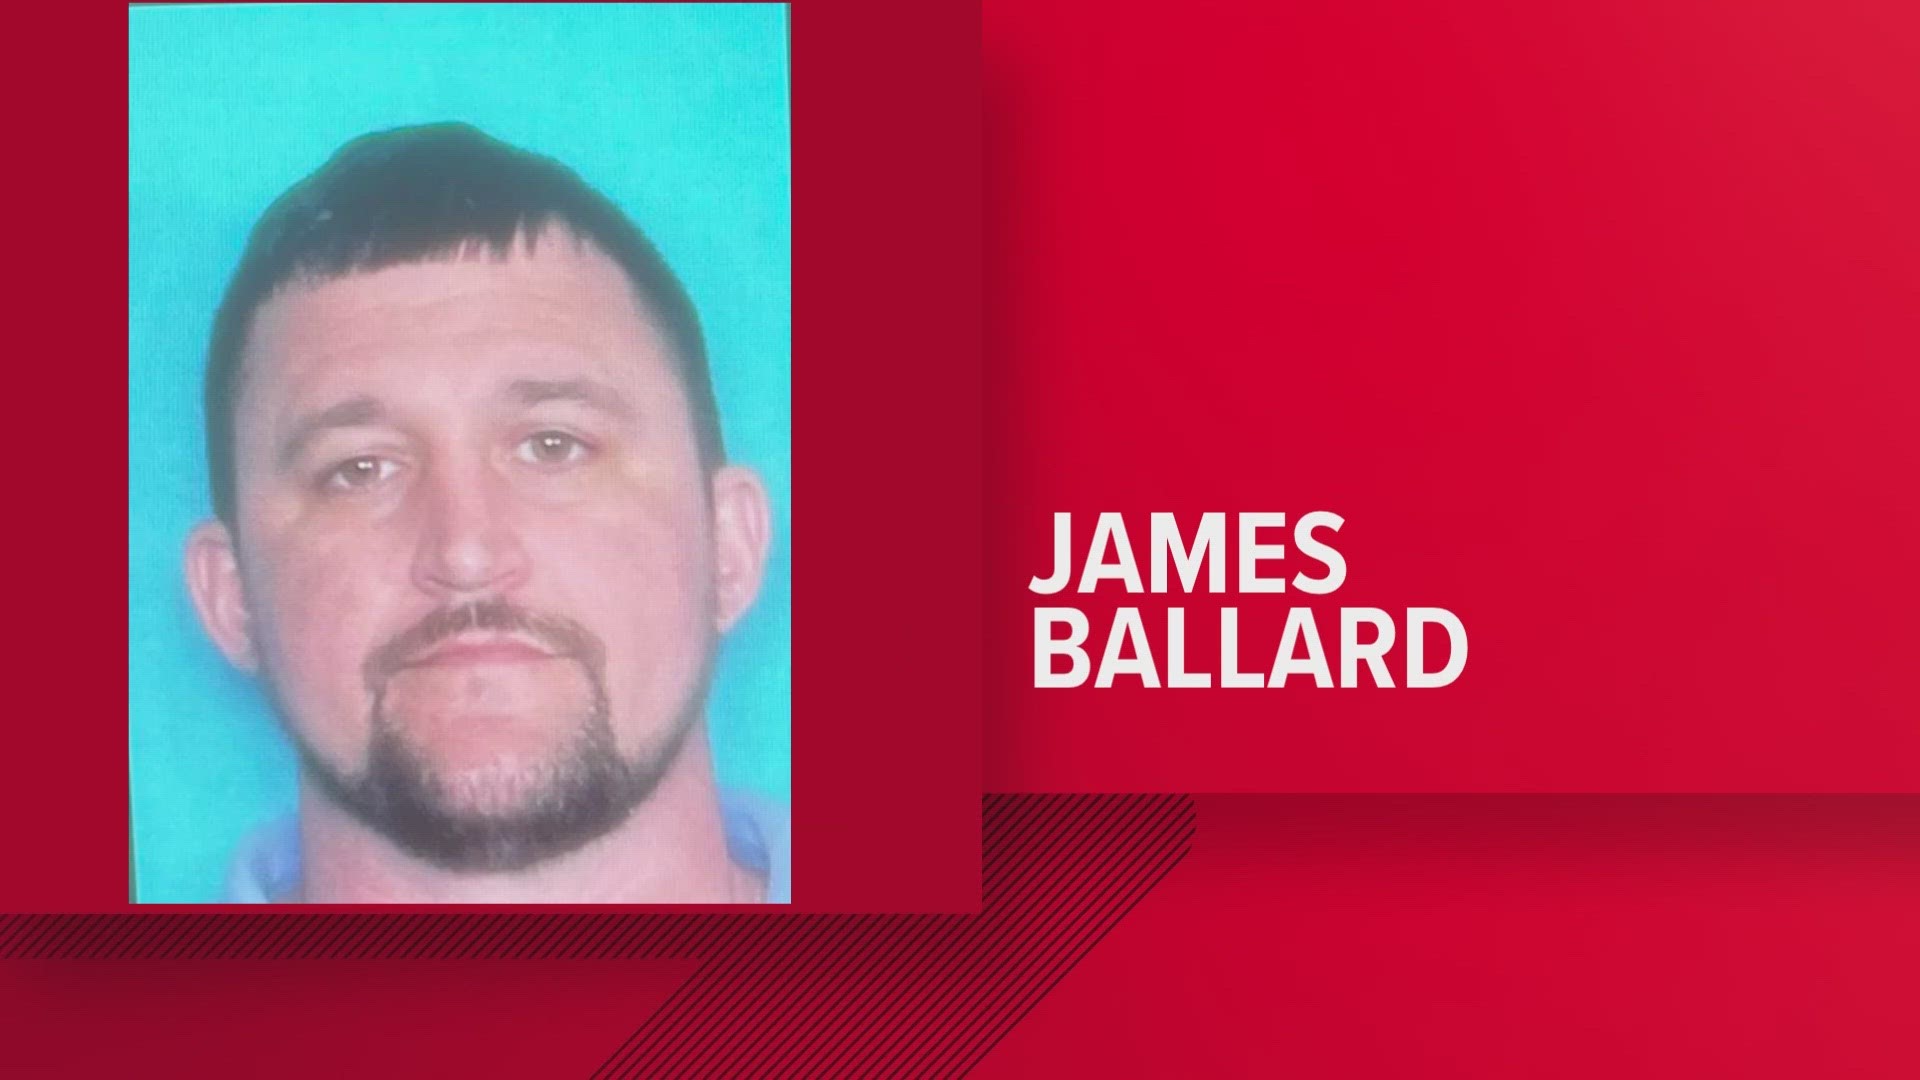 A kidnapping suspect has been apprehended in Washington Parish after a short manhunt